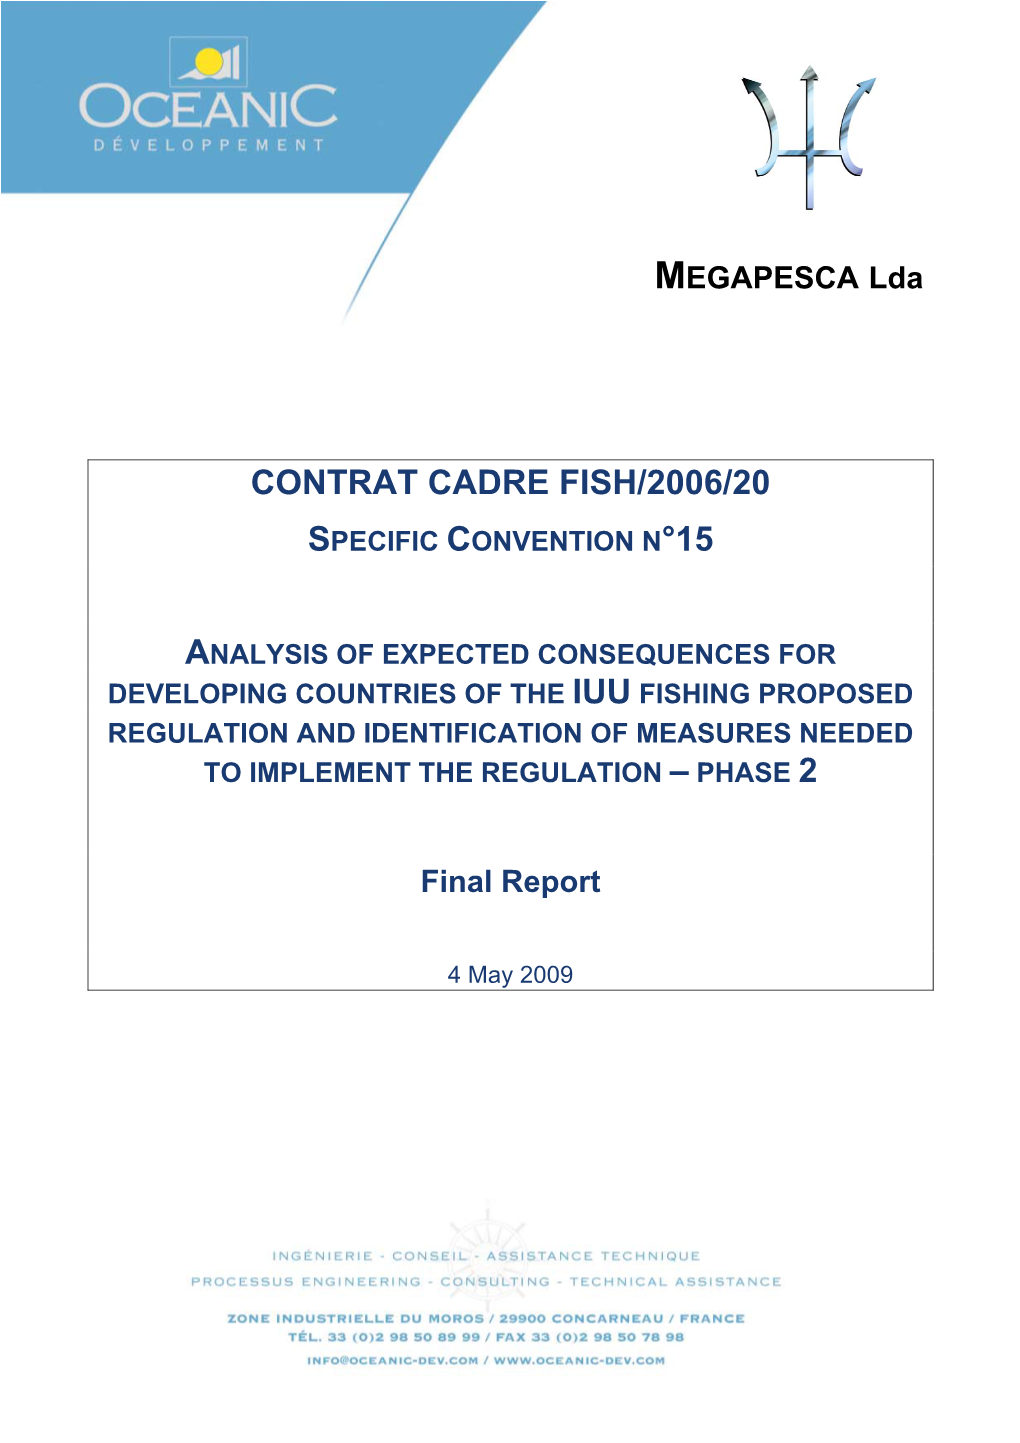 Contrat Cadre Fish/2006/20 Specific Convention N°15